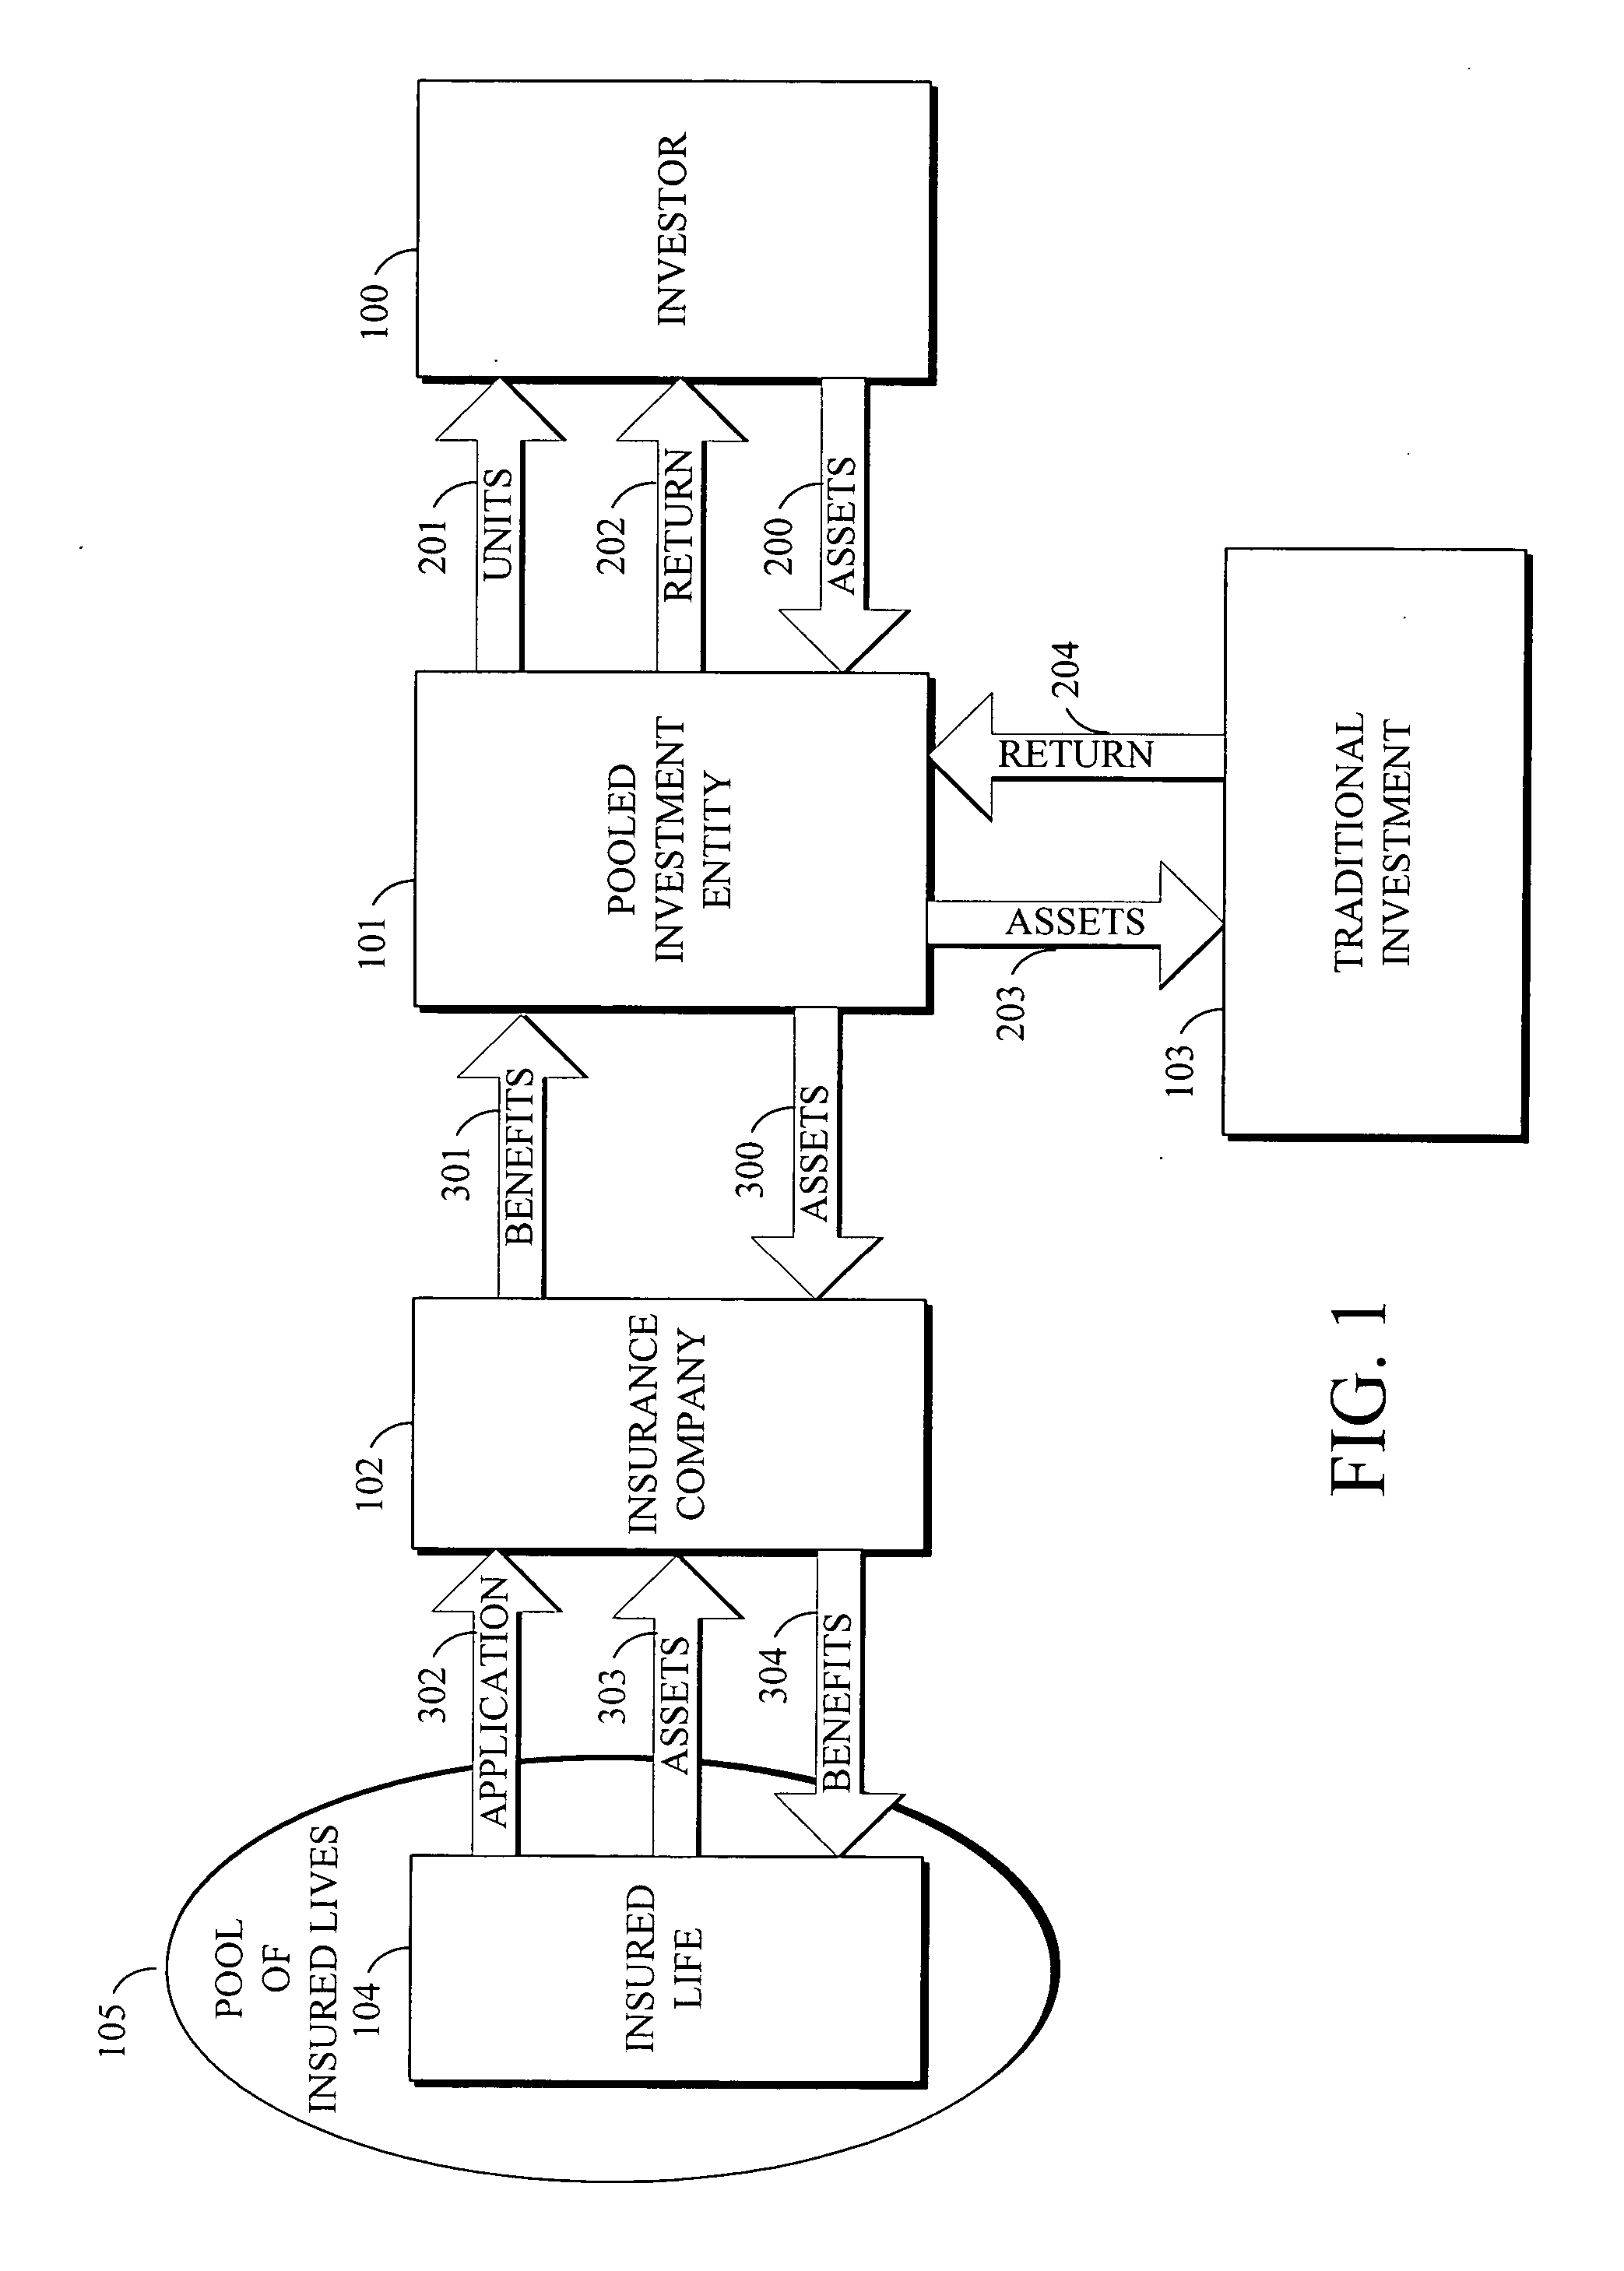 Apparatus and method for achieving enhanced returns on investments